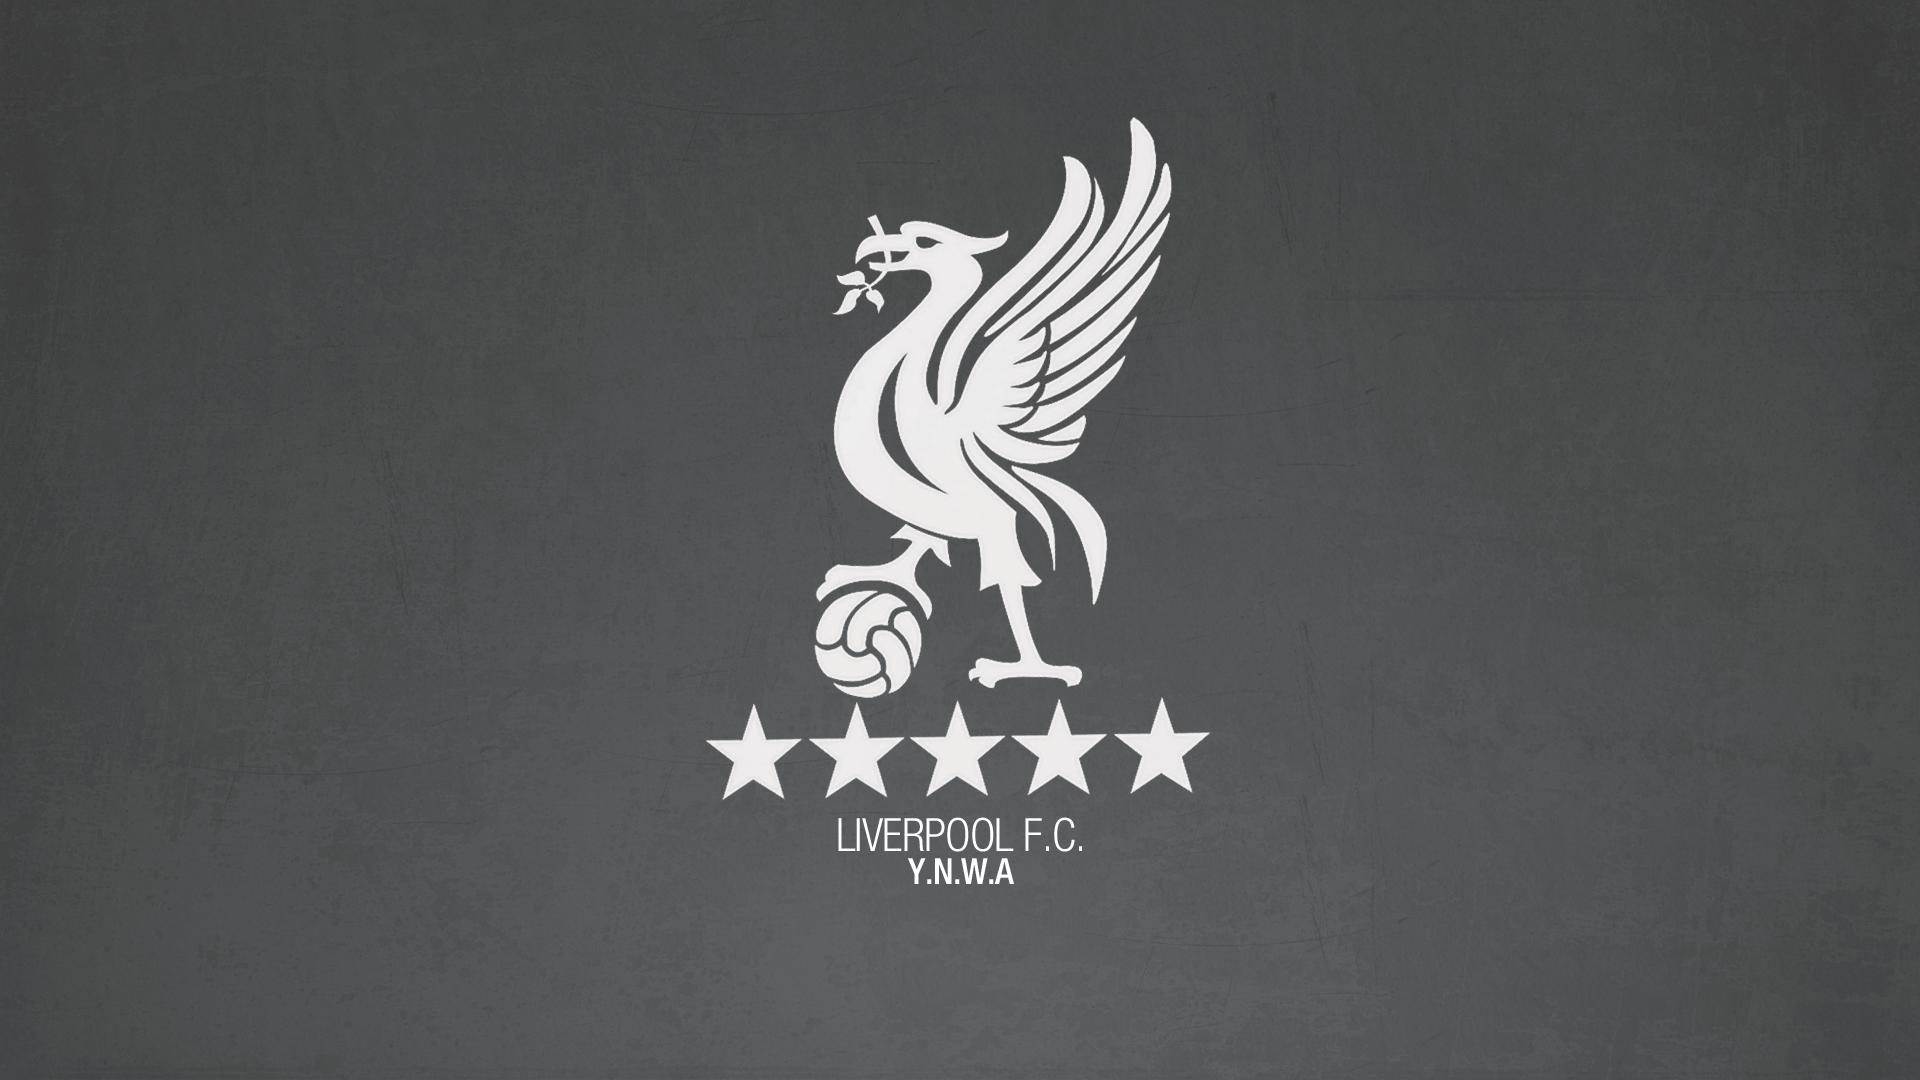 liverpool logo hd wallpapers 2014 Desktop Backgrounds for Free HD